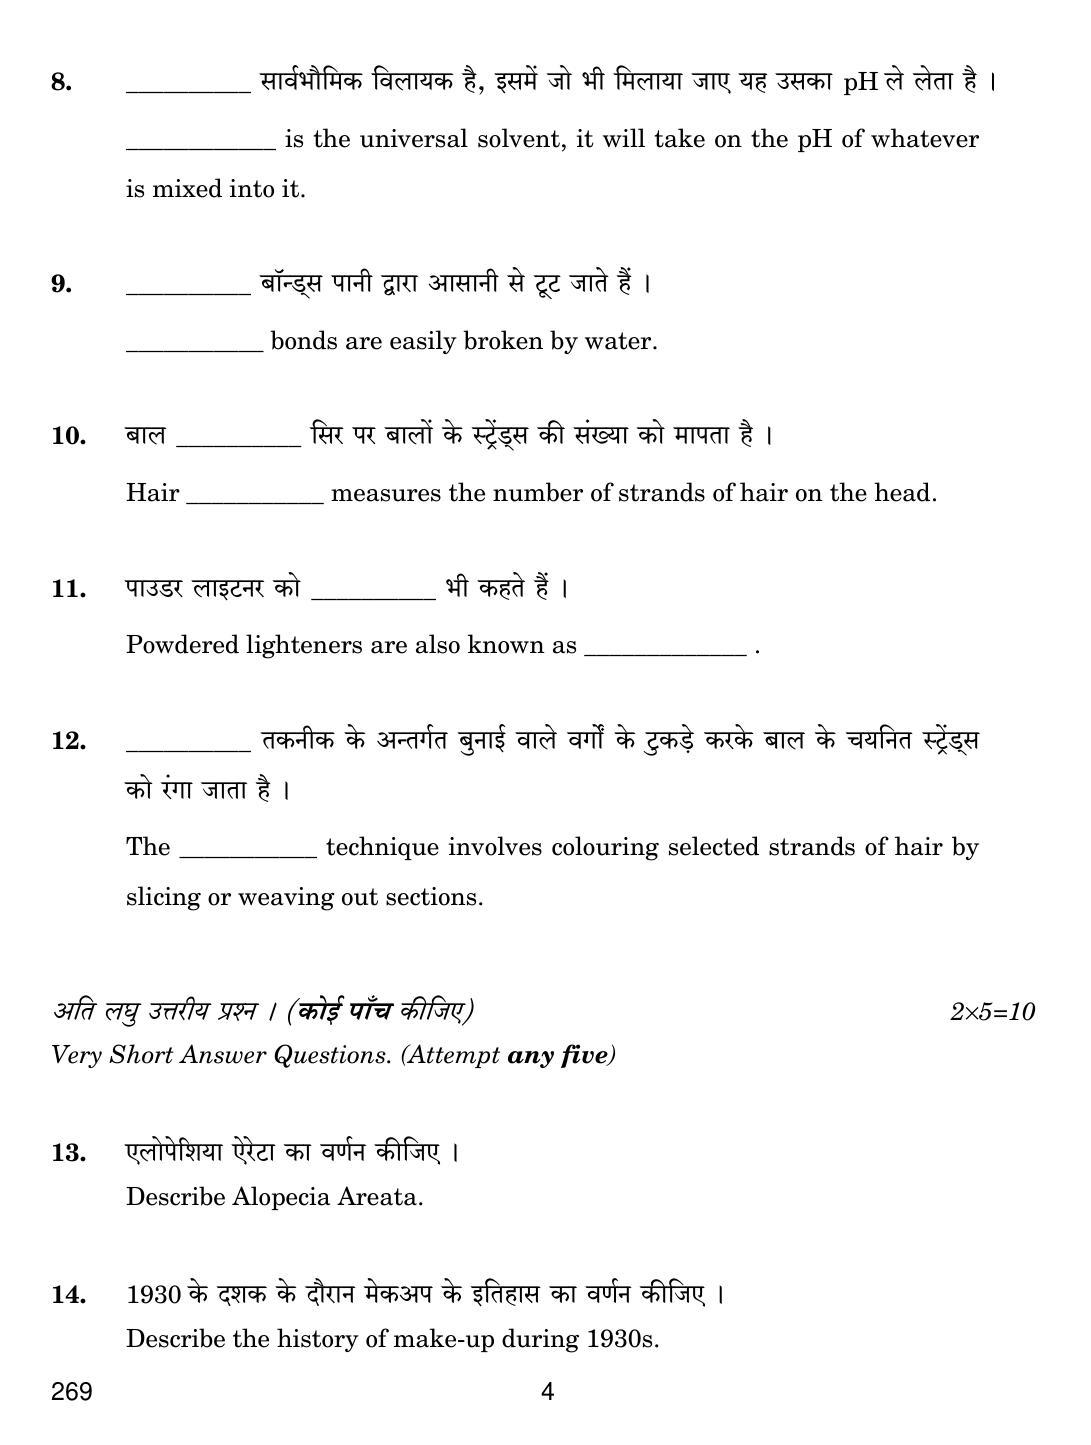 CBSE Class 12 269 BEAUTY AND HAIR 2019 Compartment Question Paper - Page 4